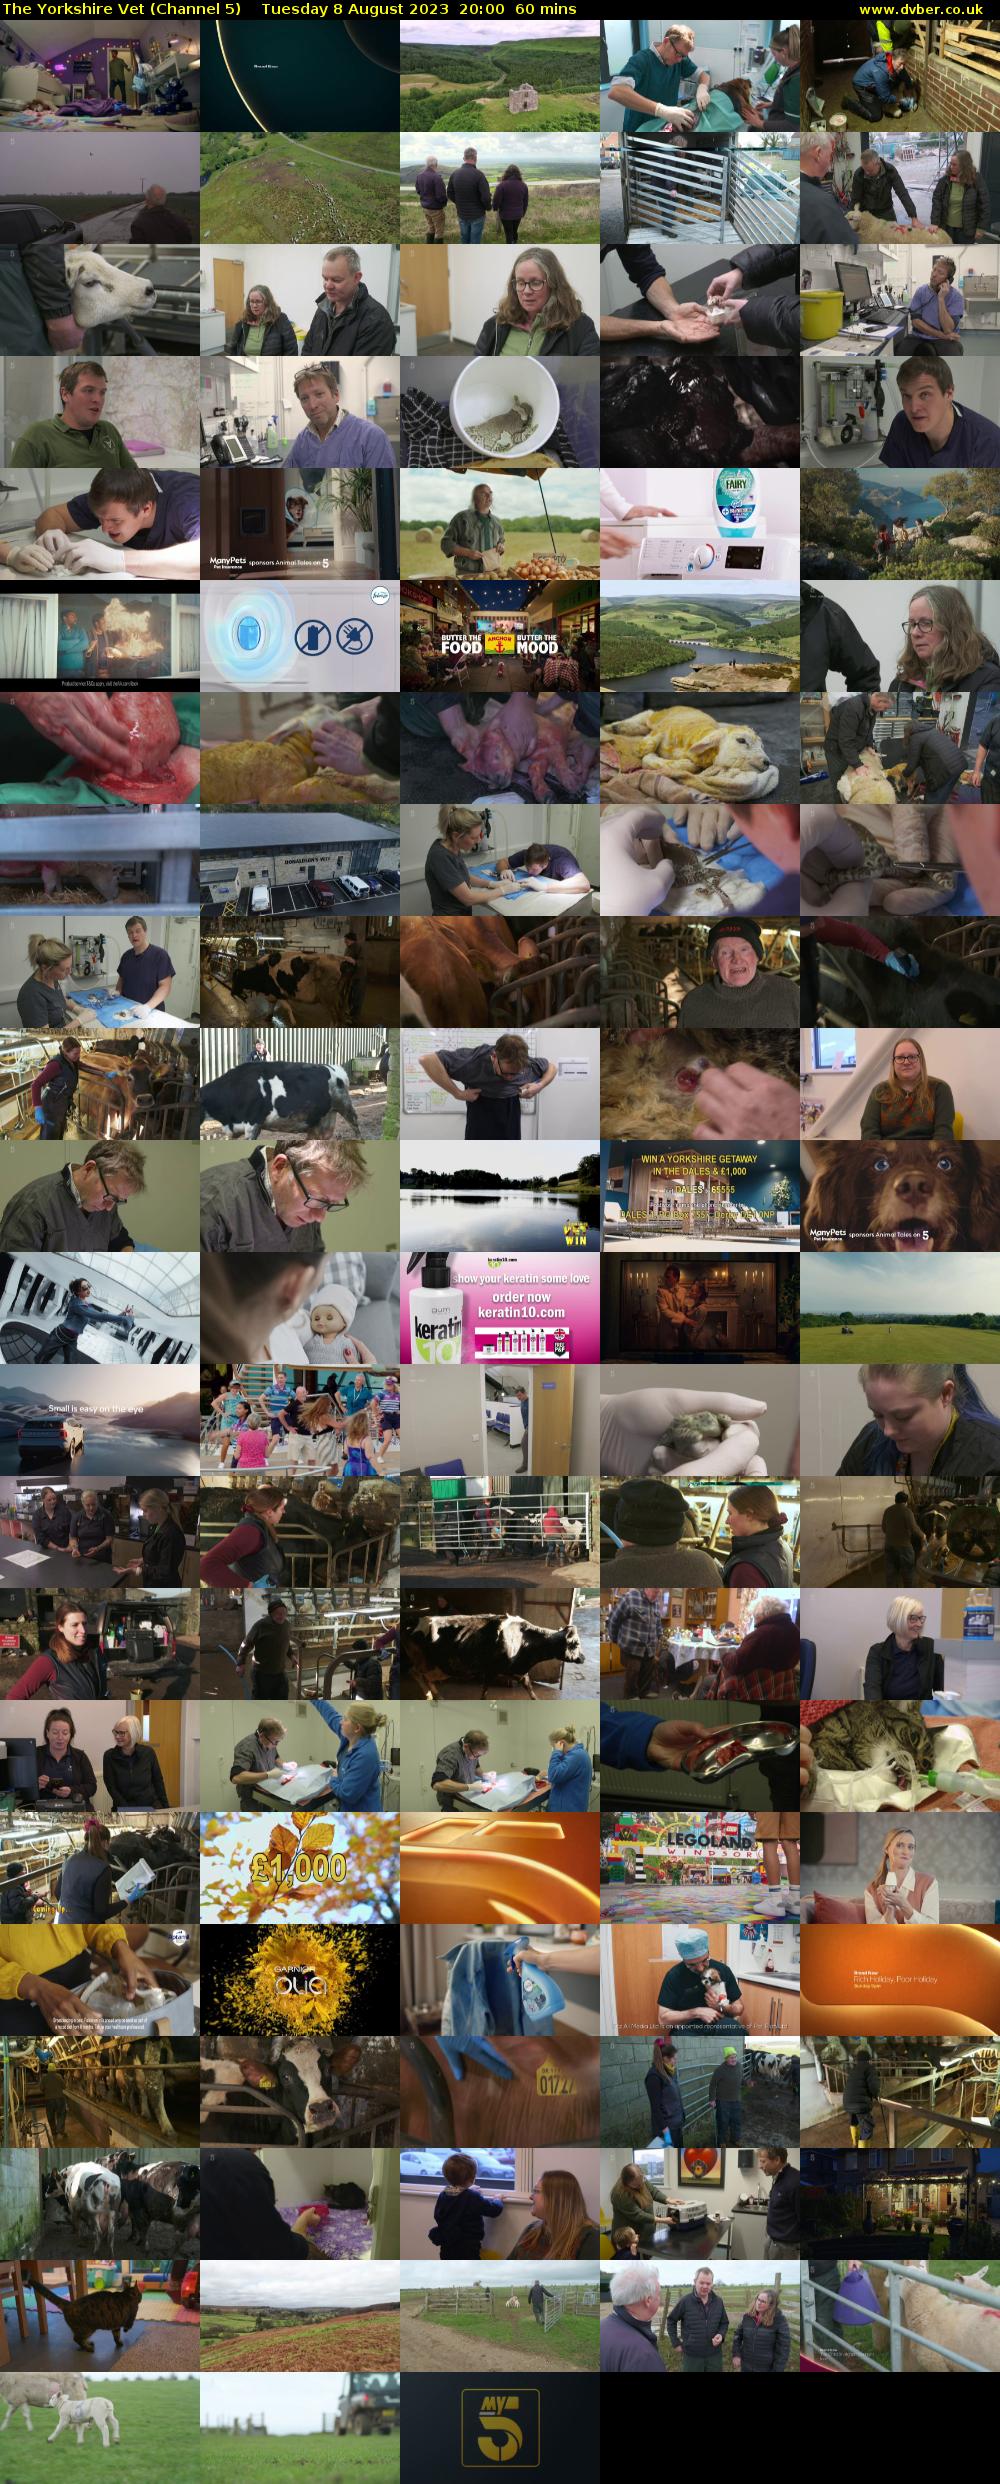 The Yorkshire Vet (Channel 5) Tuesday 8 August 2023 20:00 - 21:00